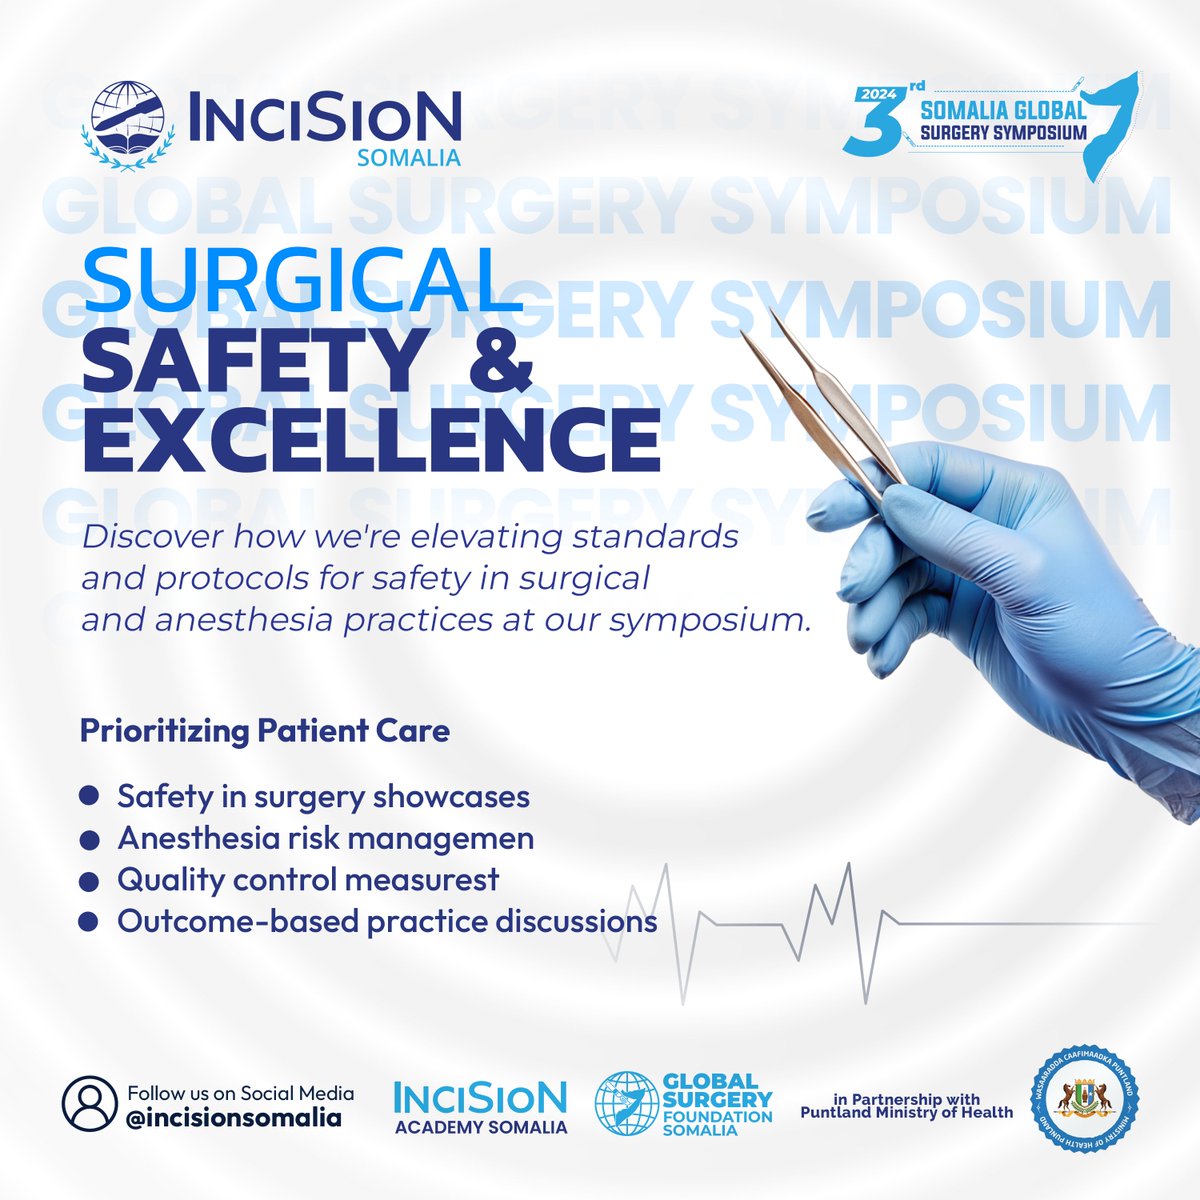 Discover how we're elevating standards and protocols for safety in surgical and anesthesia practices at our symposium. 

Sign up to our newsletter to stay updated.

globalsurgeryfoundation.so

#GLOBALSURGERY #GSSF2024 #IncisionSomalia #IncisionAcademy #Somalia